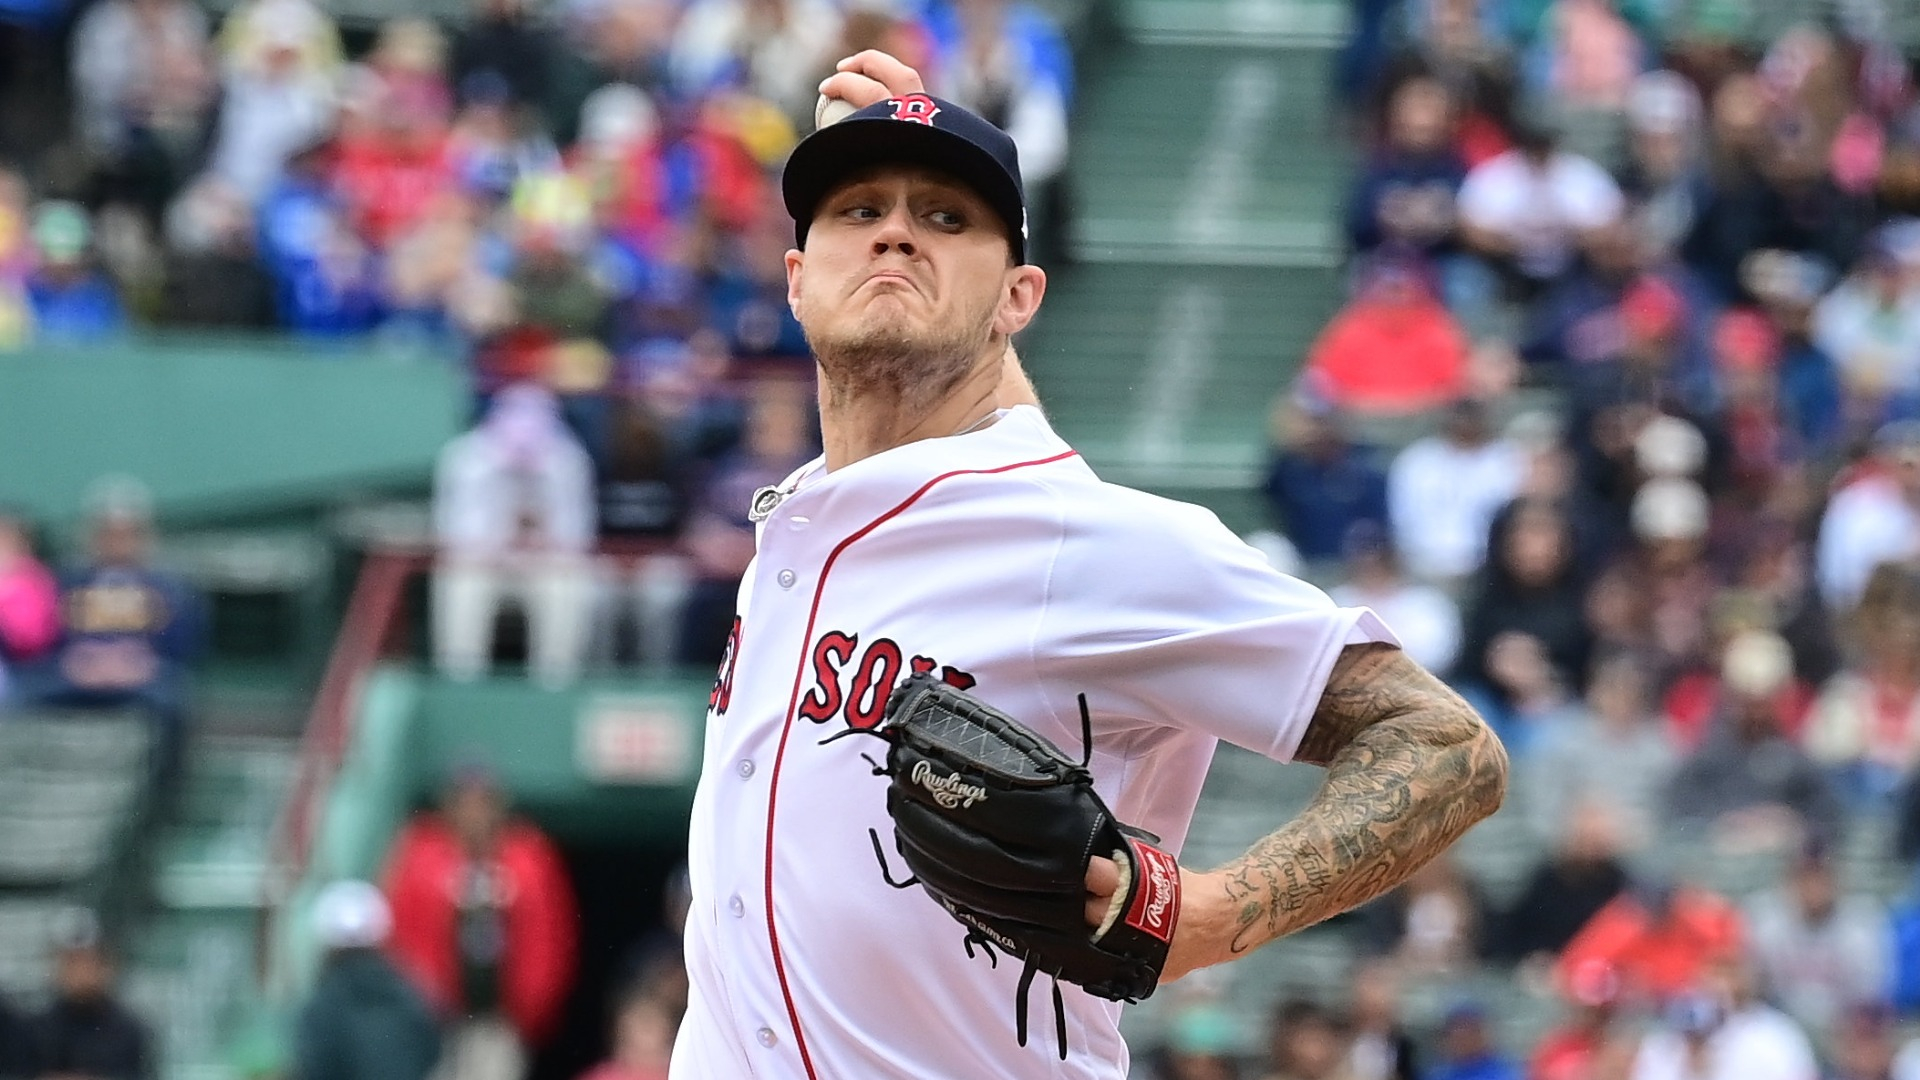 Red Sox pitcher Houck forced to leave game after taking line drive off face